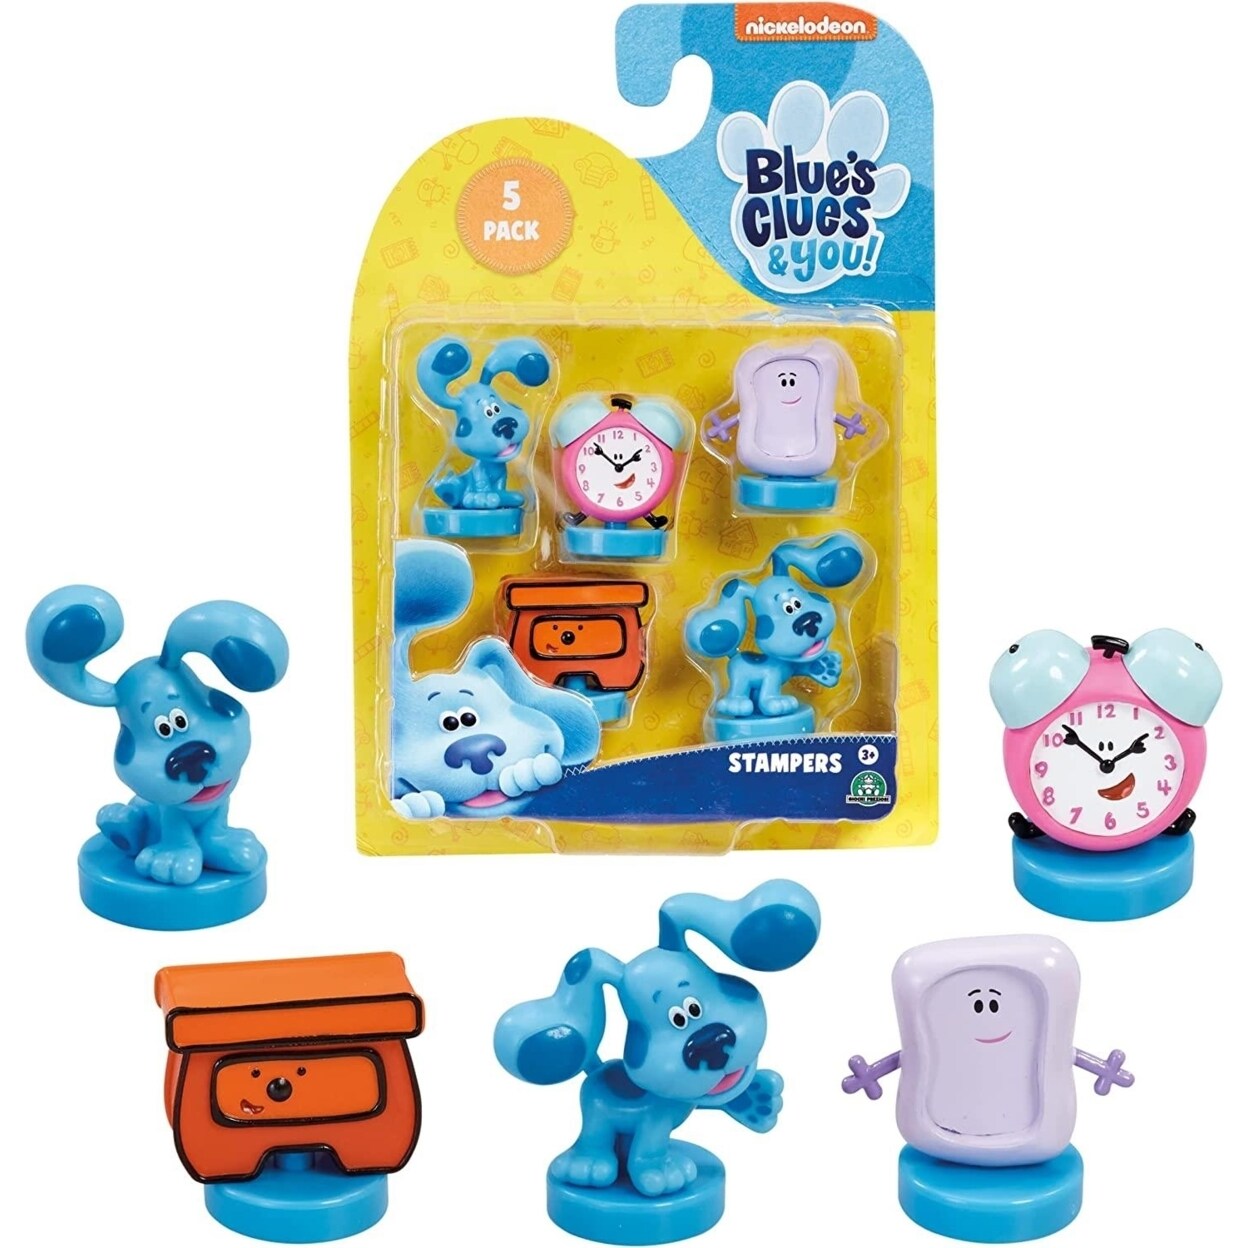 PMI International Blues Clues Stamps 5pk Tickety Tock Clock Slippery Soap Sidetable Drawer Set